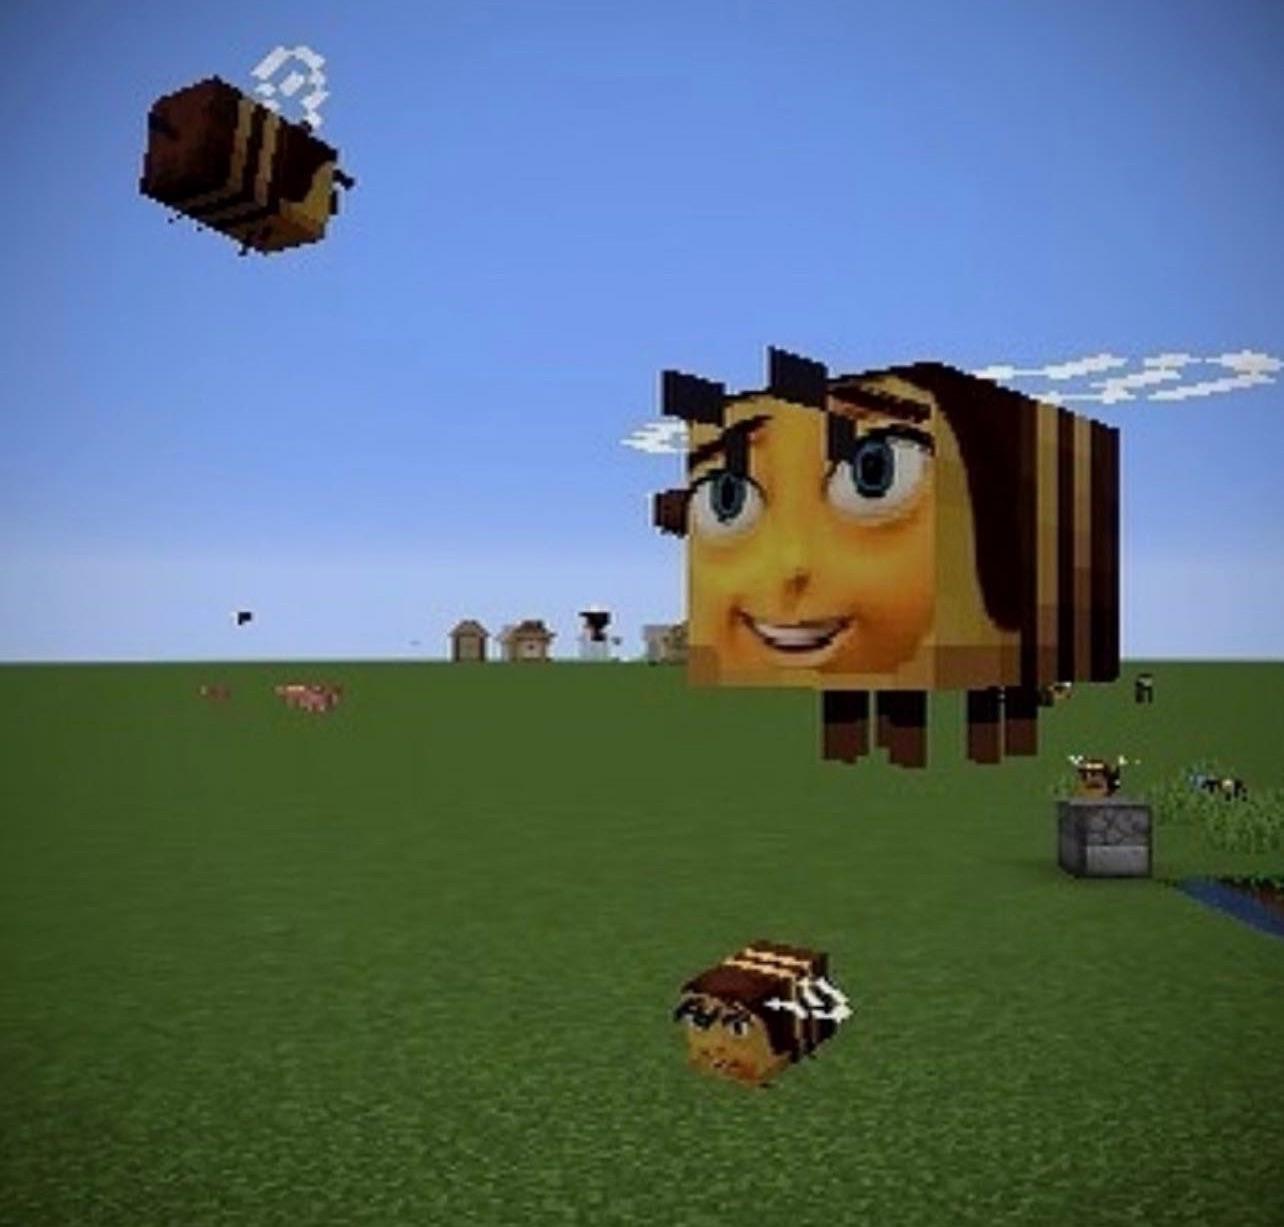 Minecraft Memes - "Bees: The Ultimate Minecraft Upgrade"